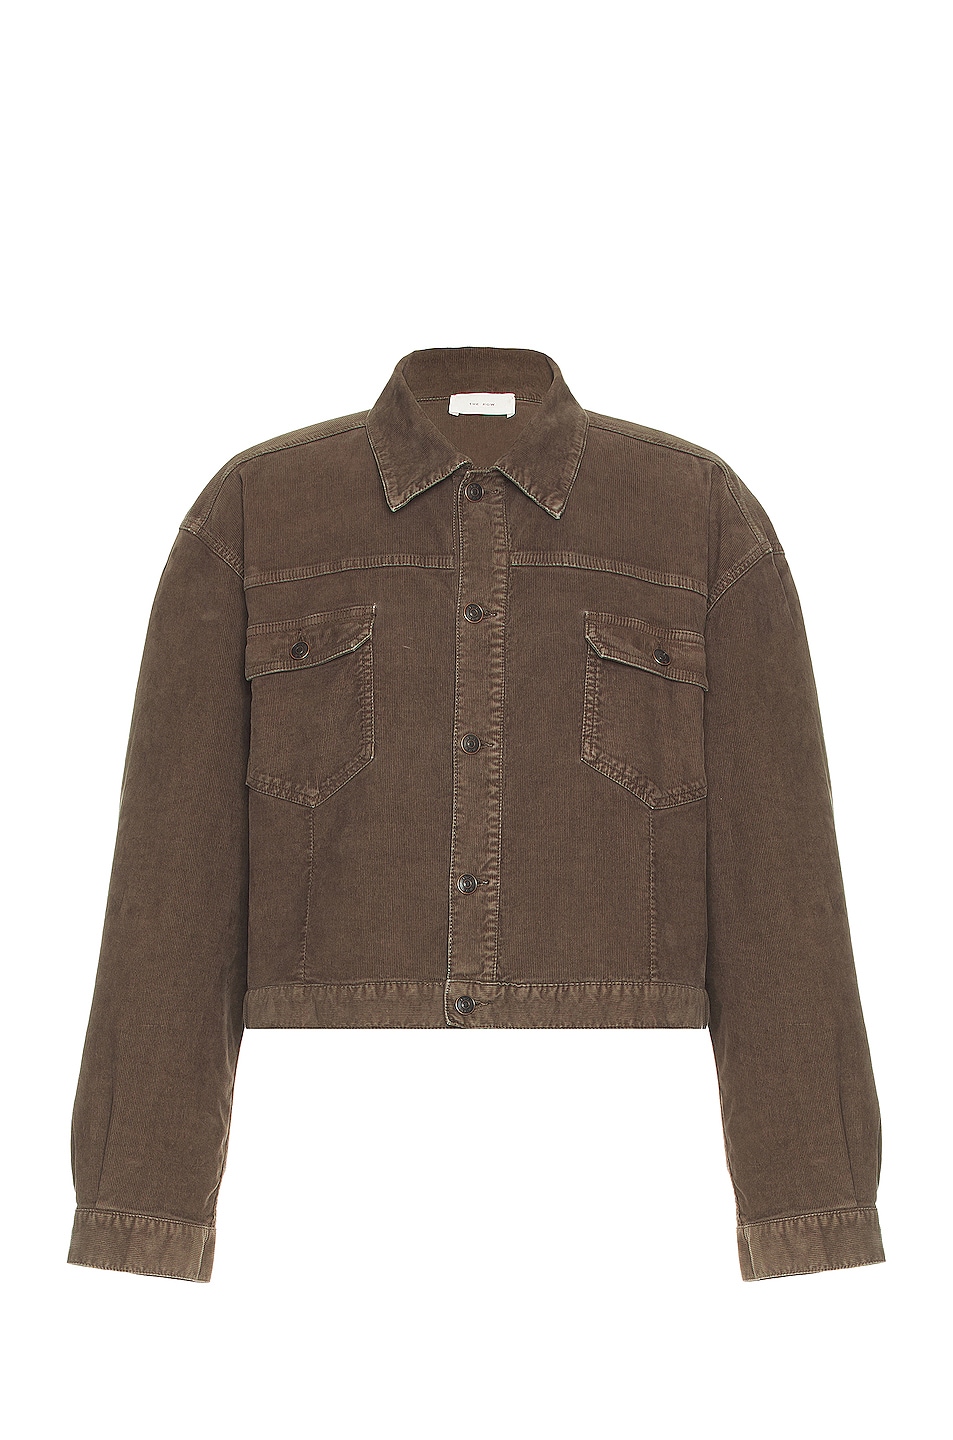 Image 1 of The Row Orson Jacket in Taupe